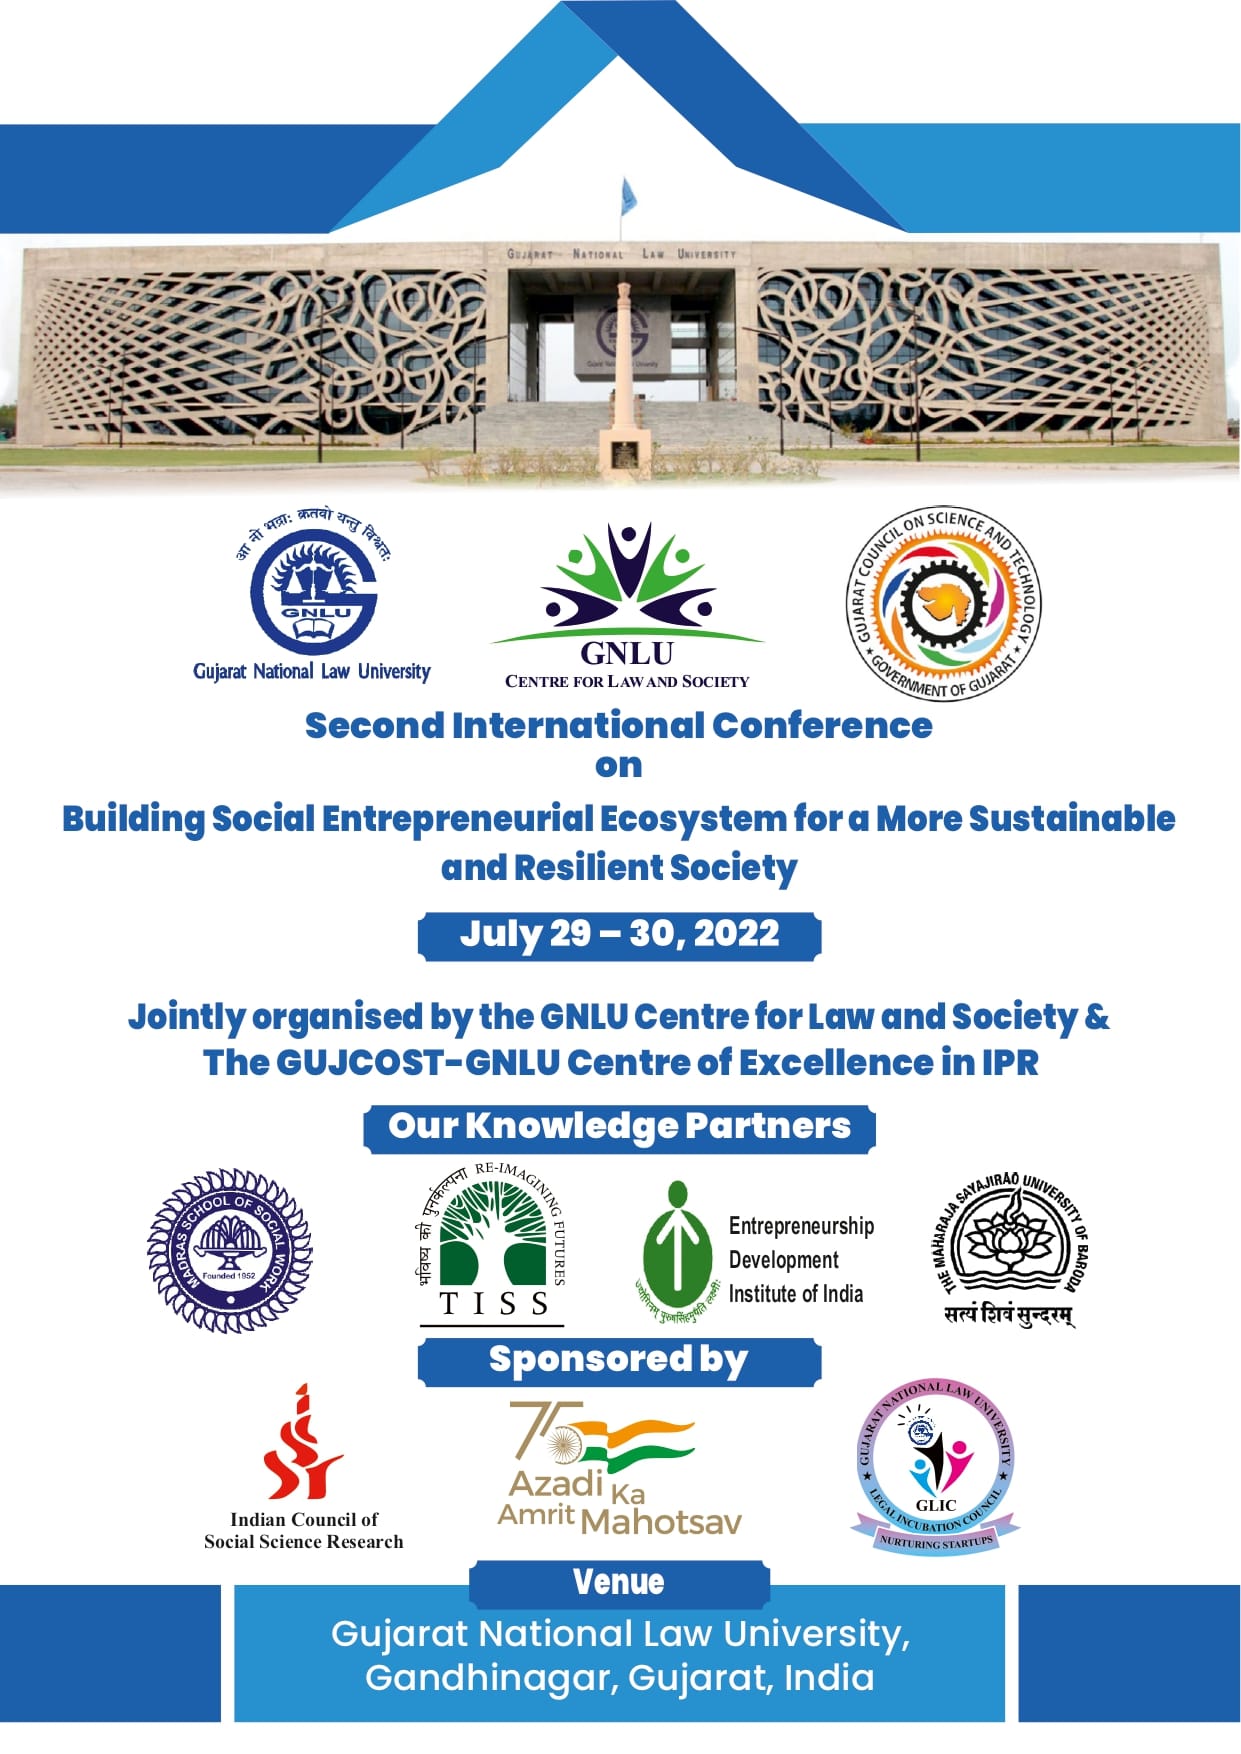 International Conference on “Building Social Entrepreneurial Ecosystem for a More Sustainable and Resilient Society